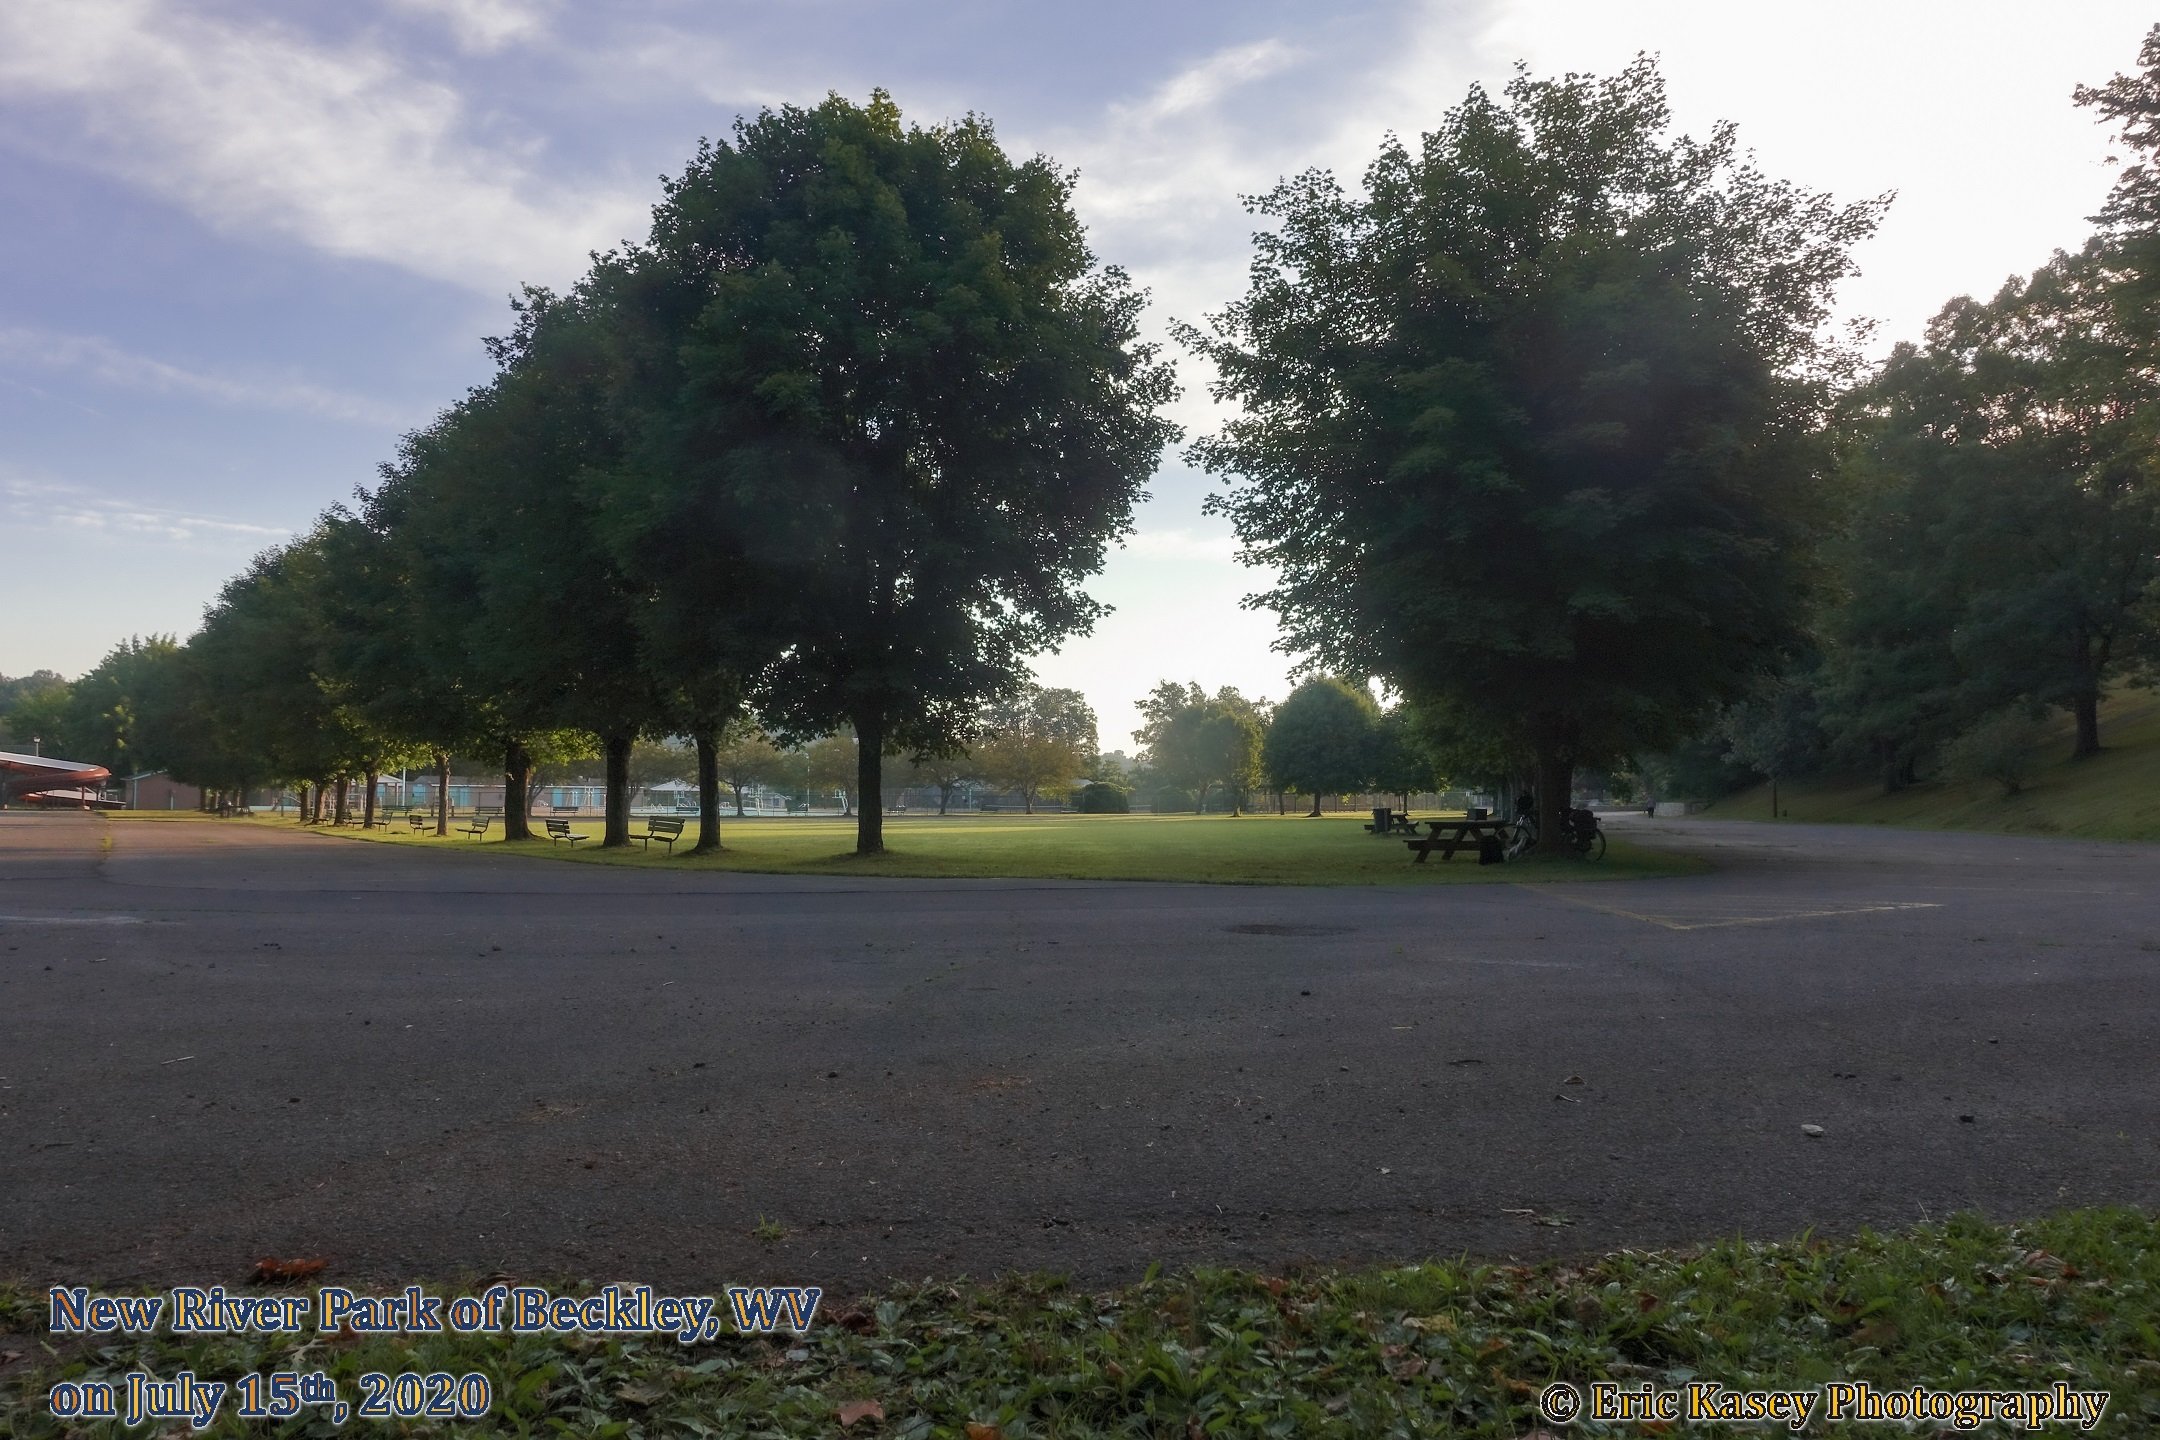 24 - New River Park of Beckley, WV on July 15th, 2020.JPG